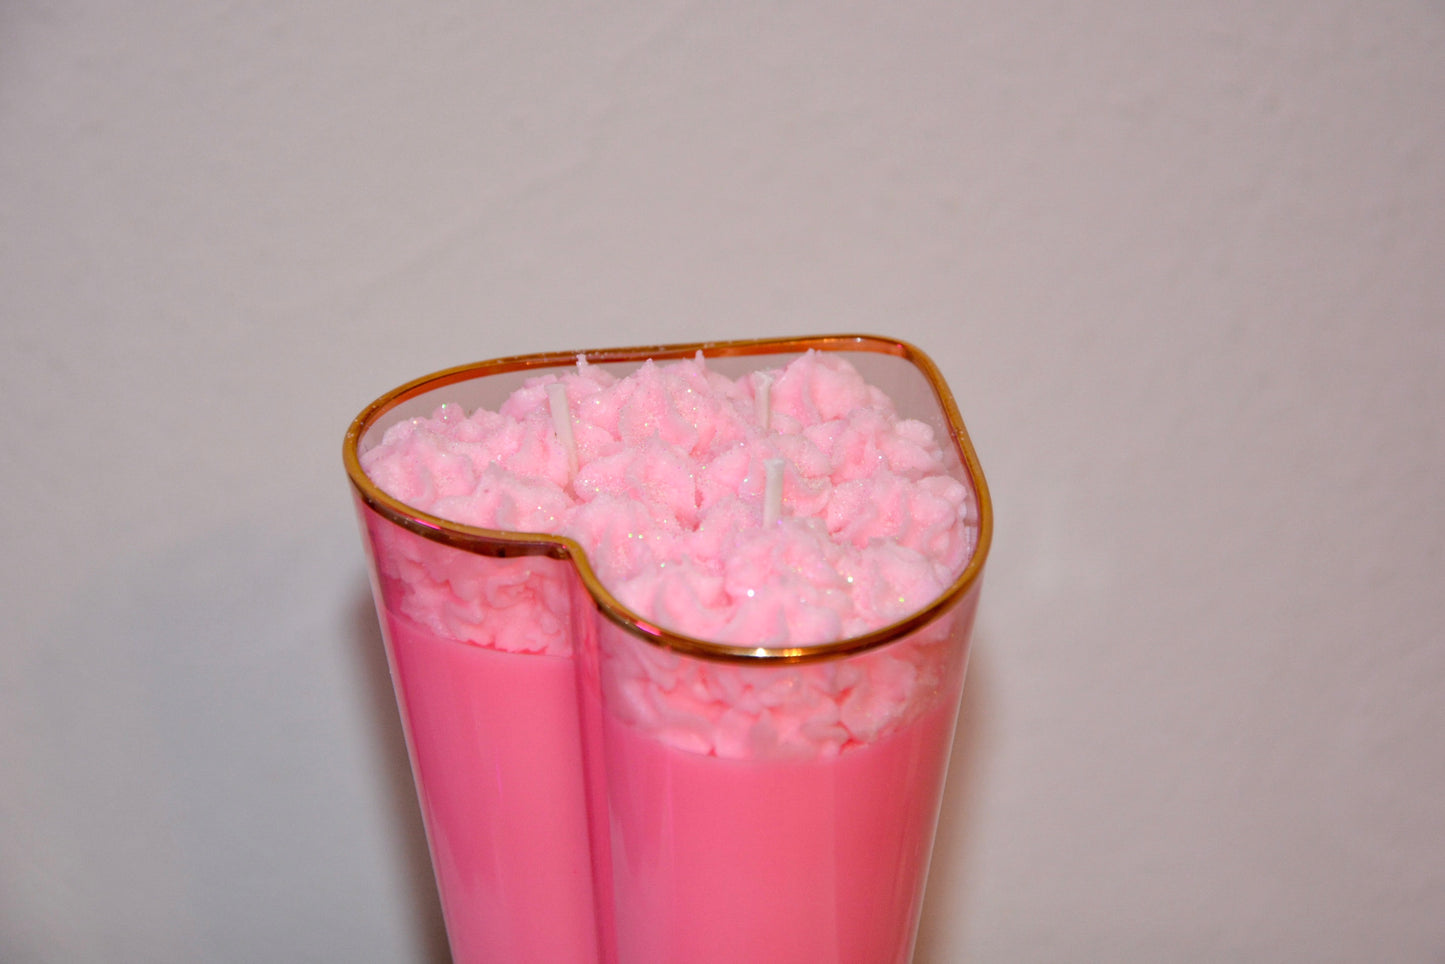 STRAWBERRY MILK HEART GLASS CANDLE